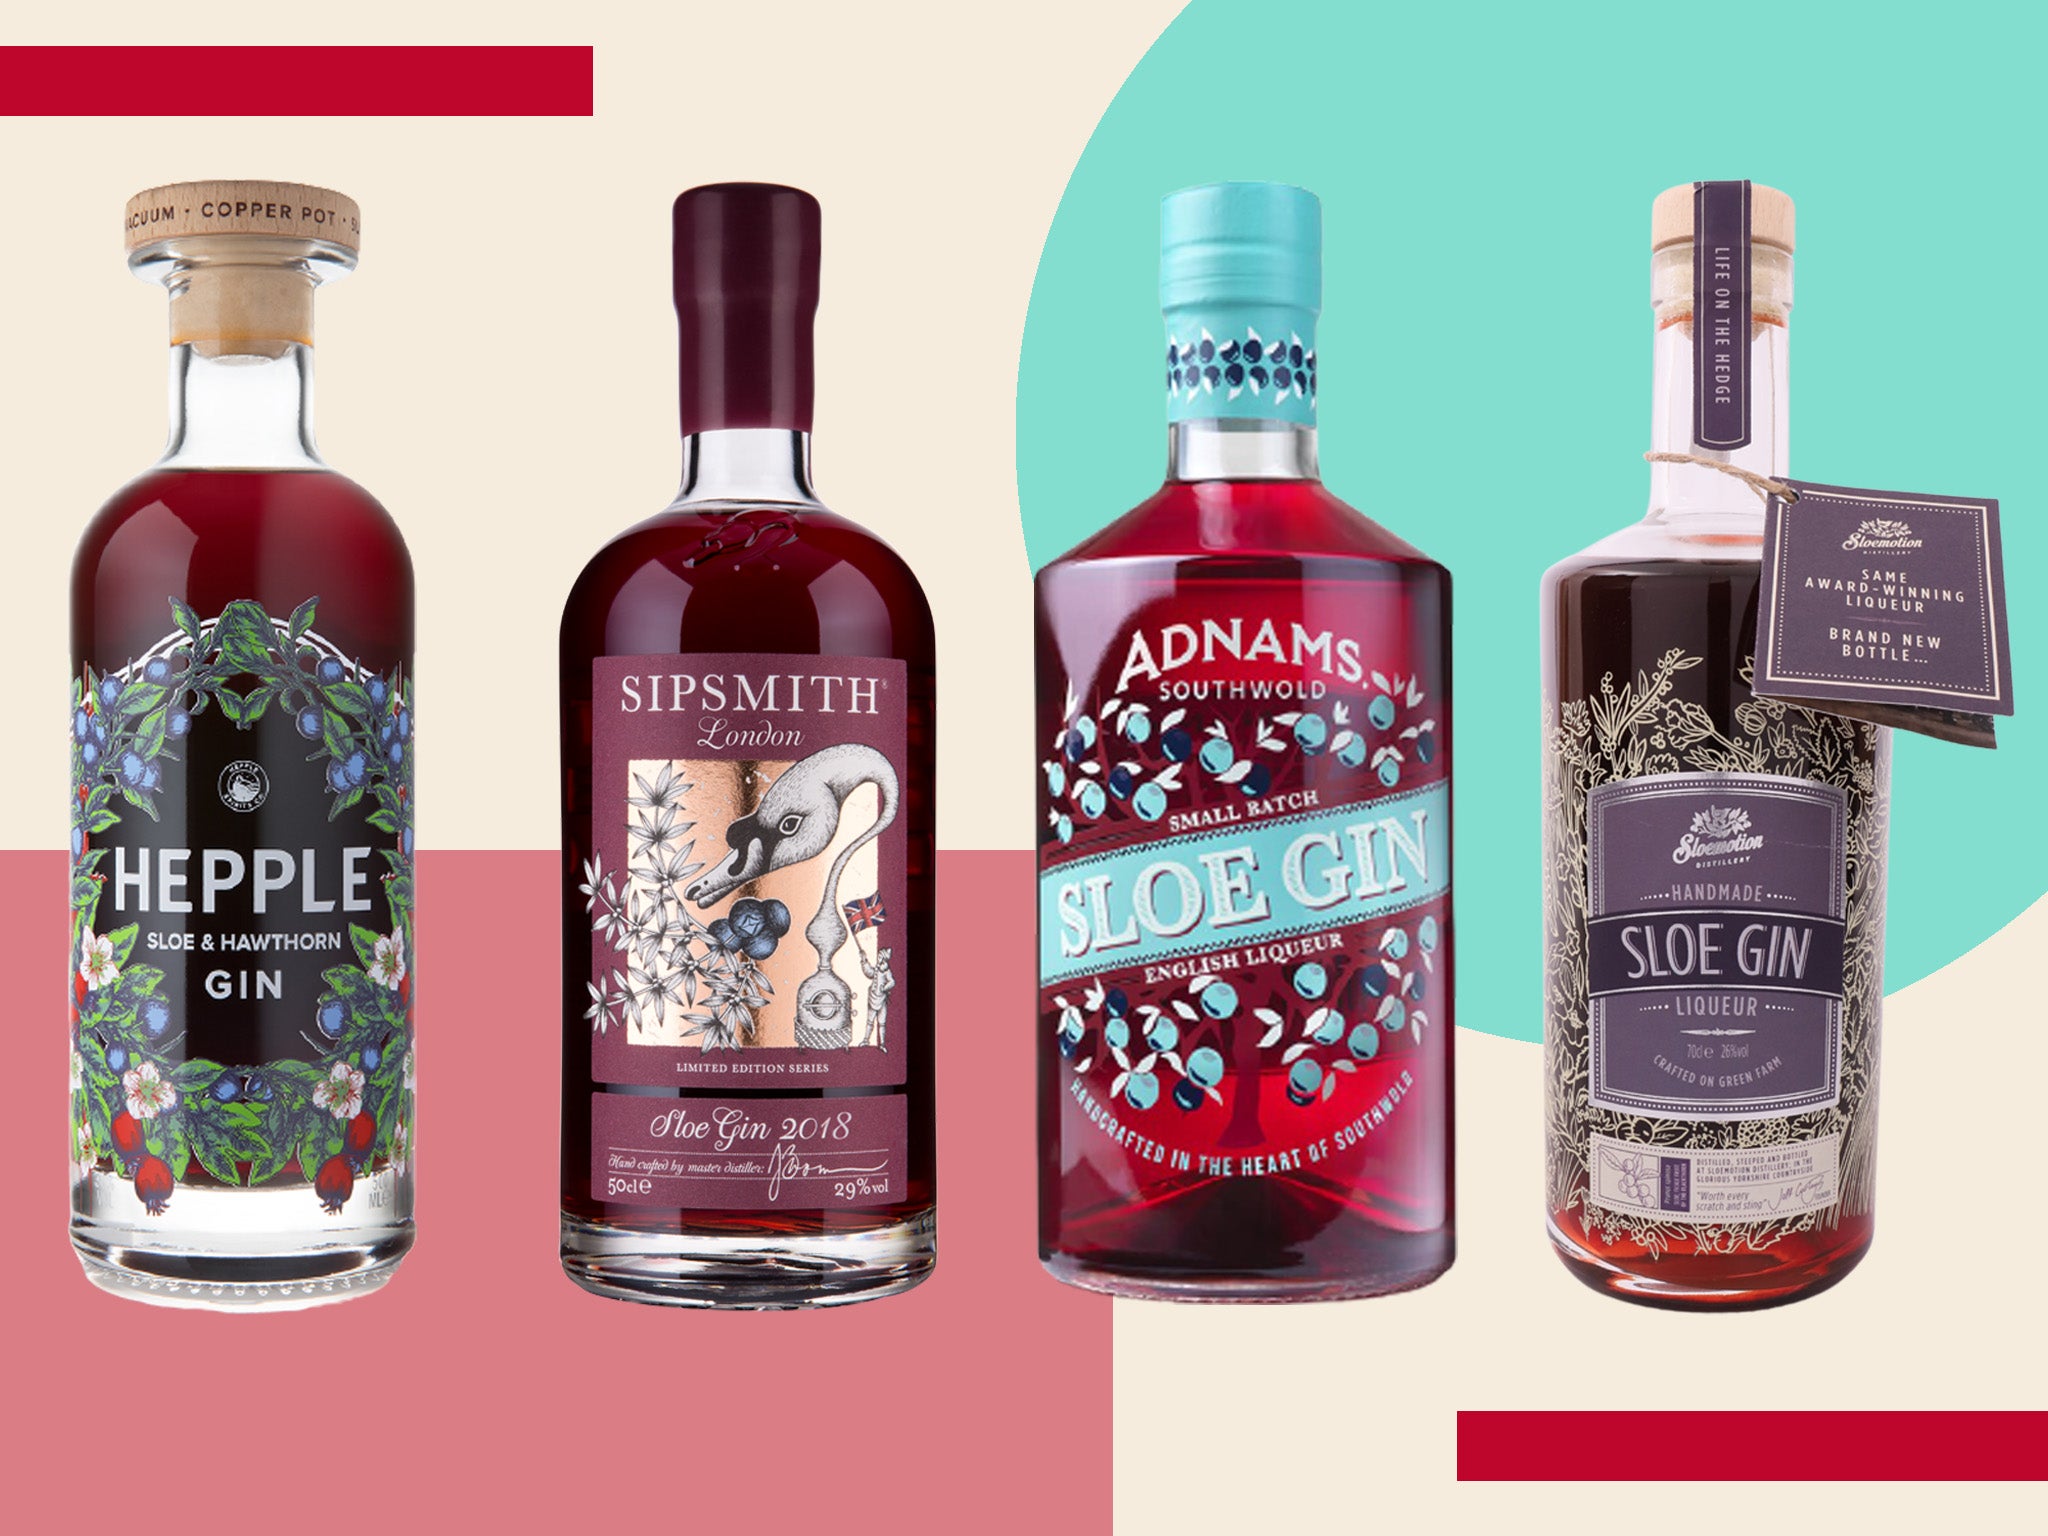 <p>While it’s easy to concoct your own at home, these professionally crafted tipples are hard to beat</p>